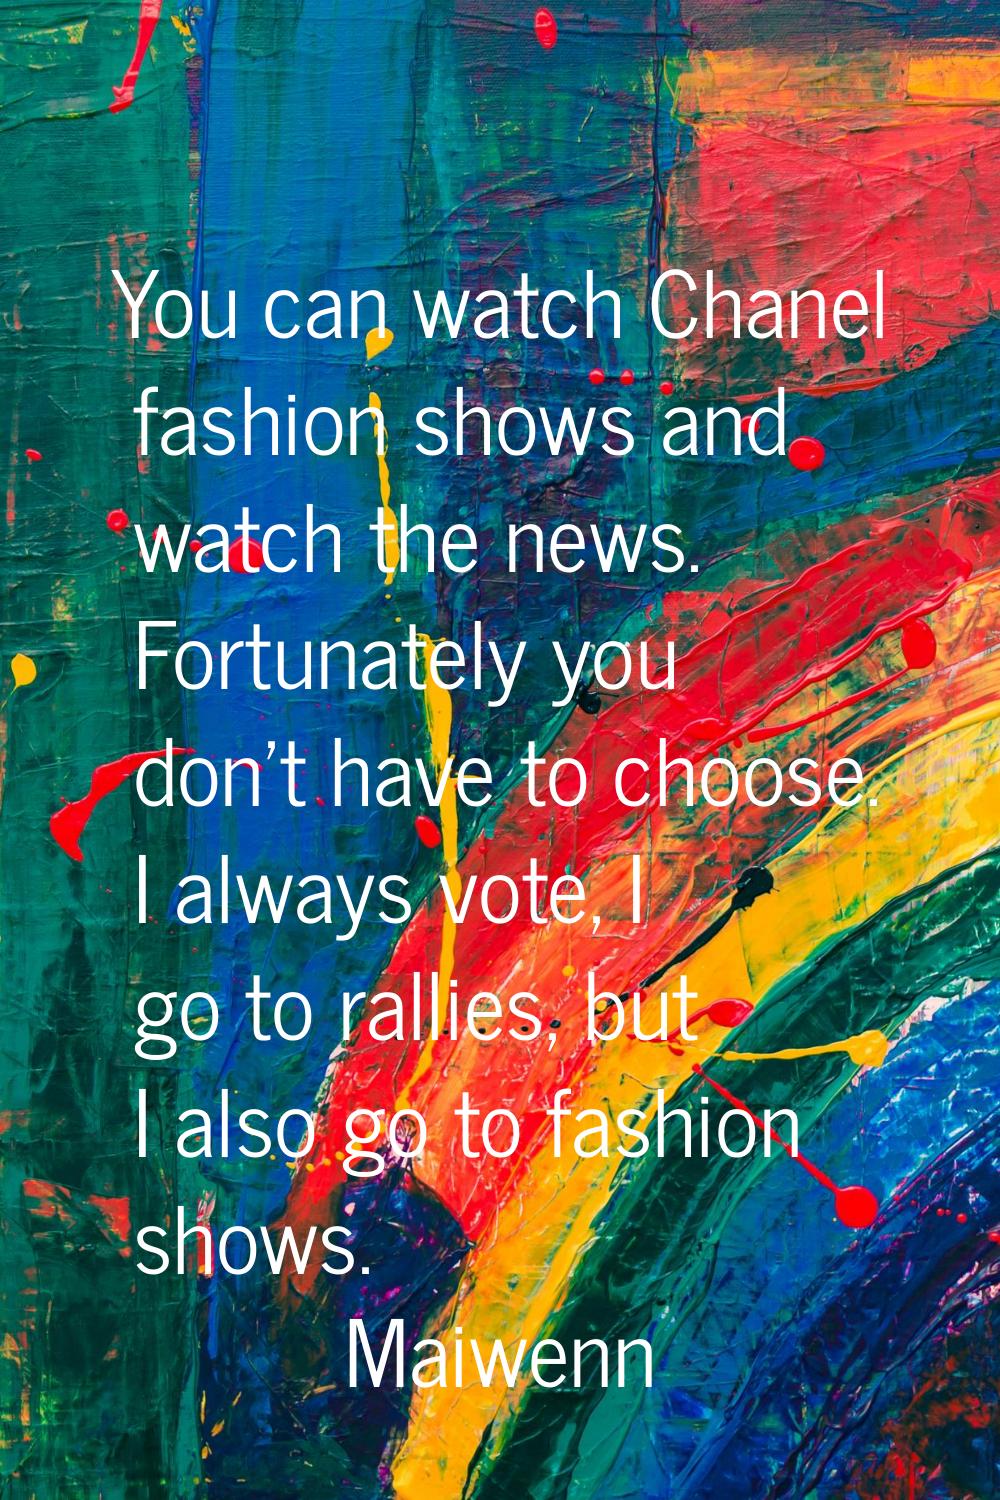 You can watch Chanel fashion shows and watch the news. Fortunately you don't have to choose. I alwa